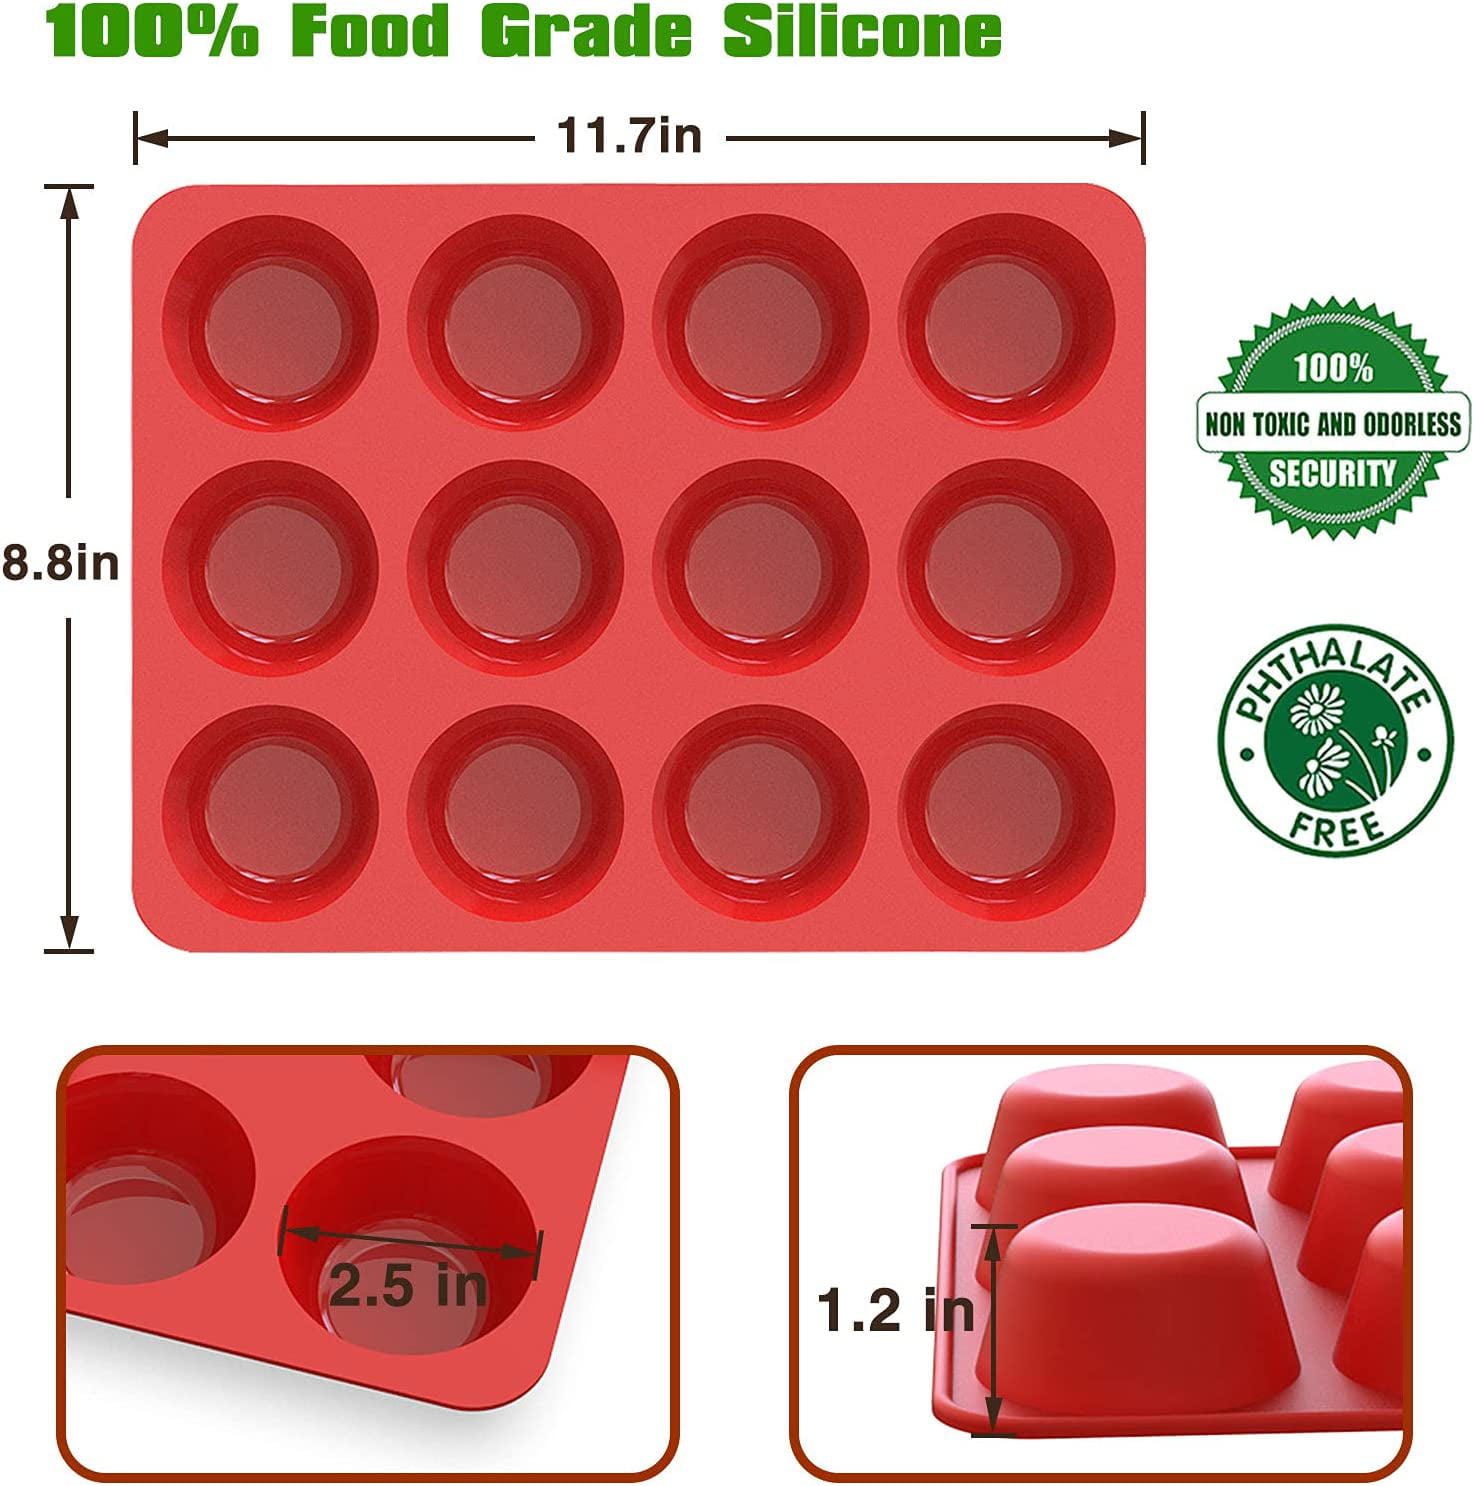 Silicone Muffin Pans Nonstick 12 Cup, 2.5 inch Silicone Cupcake